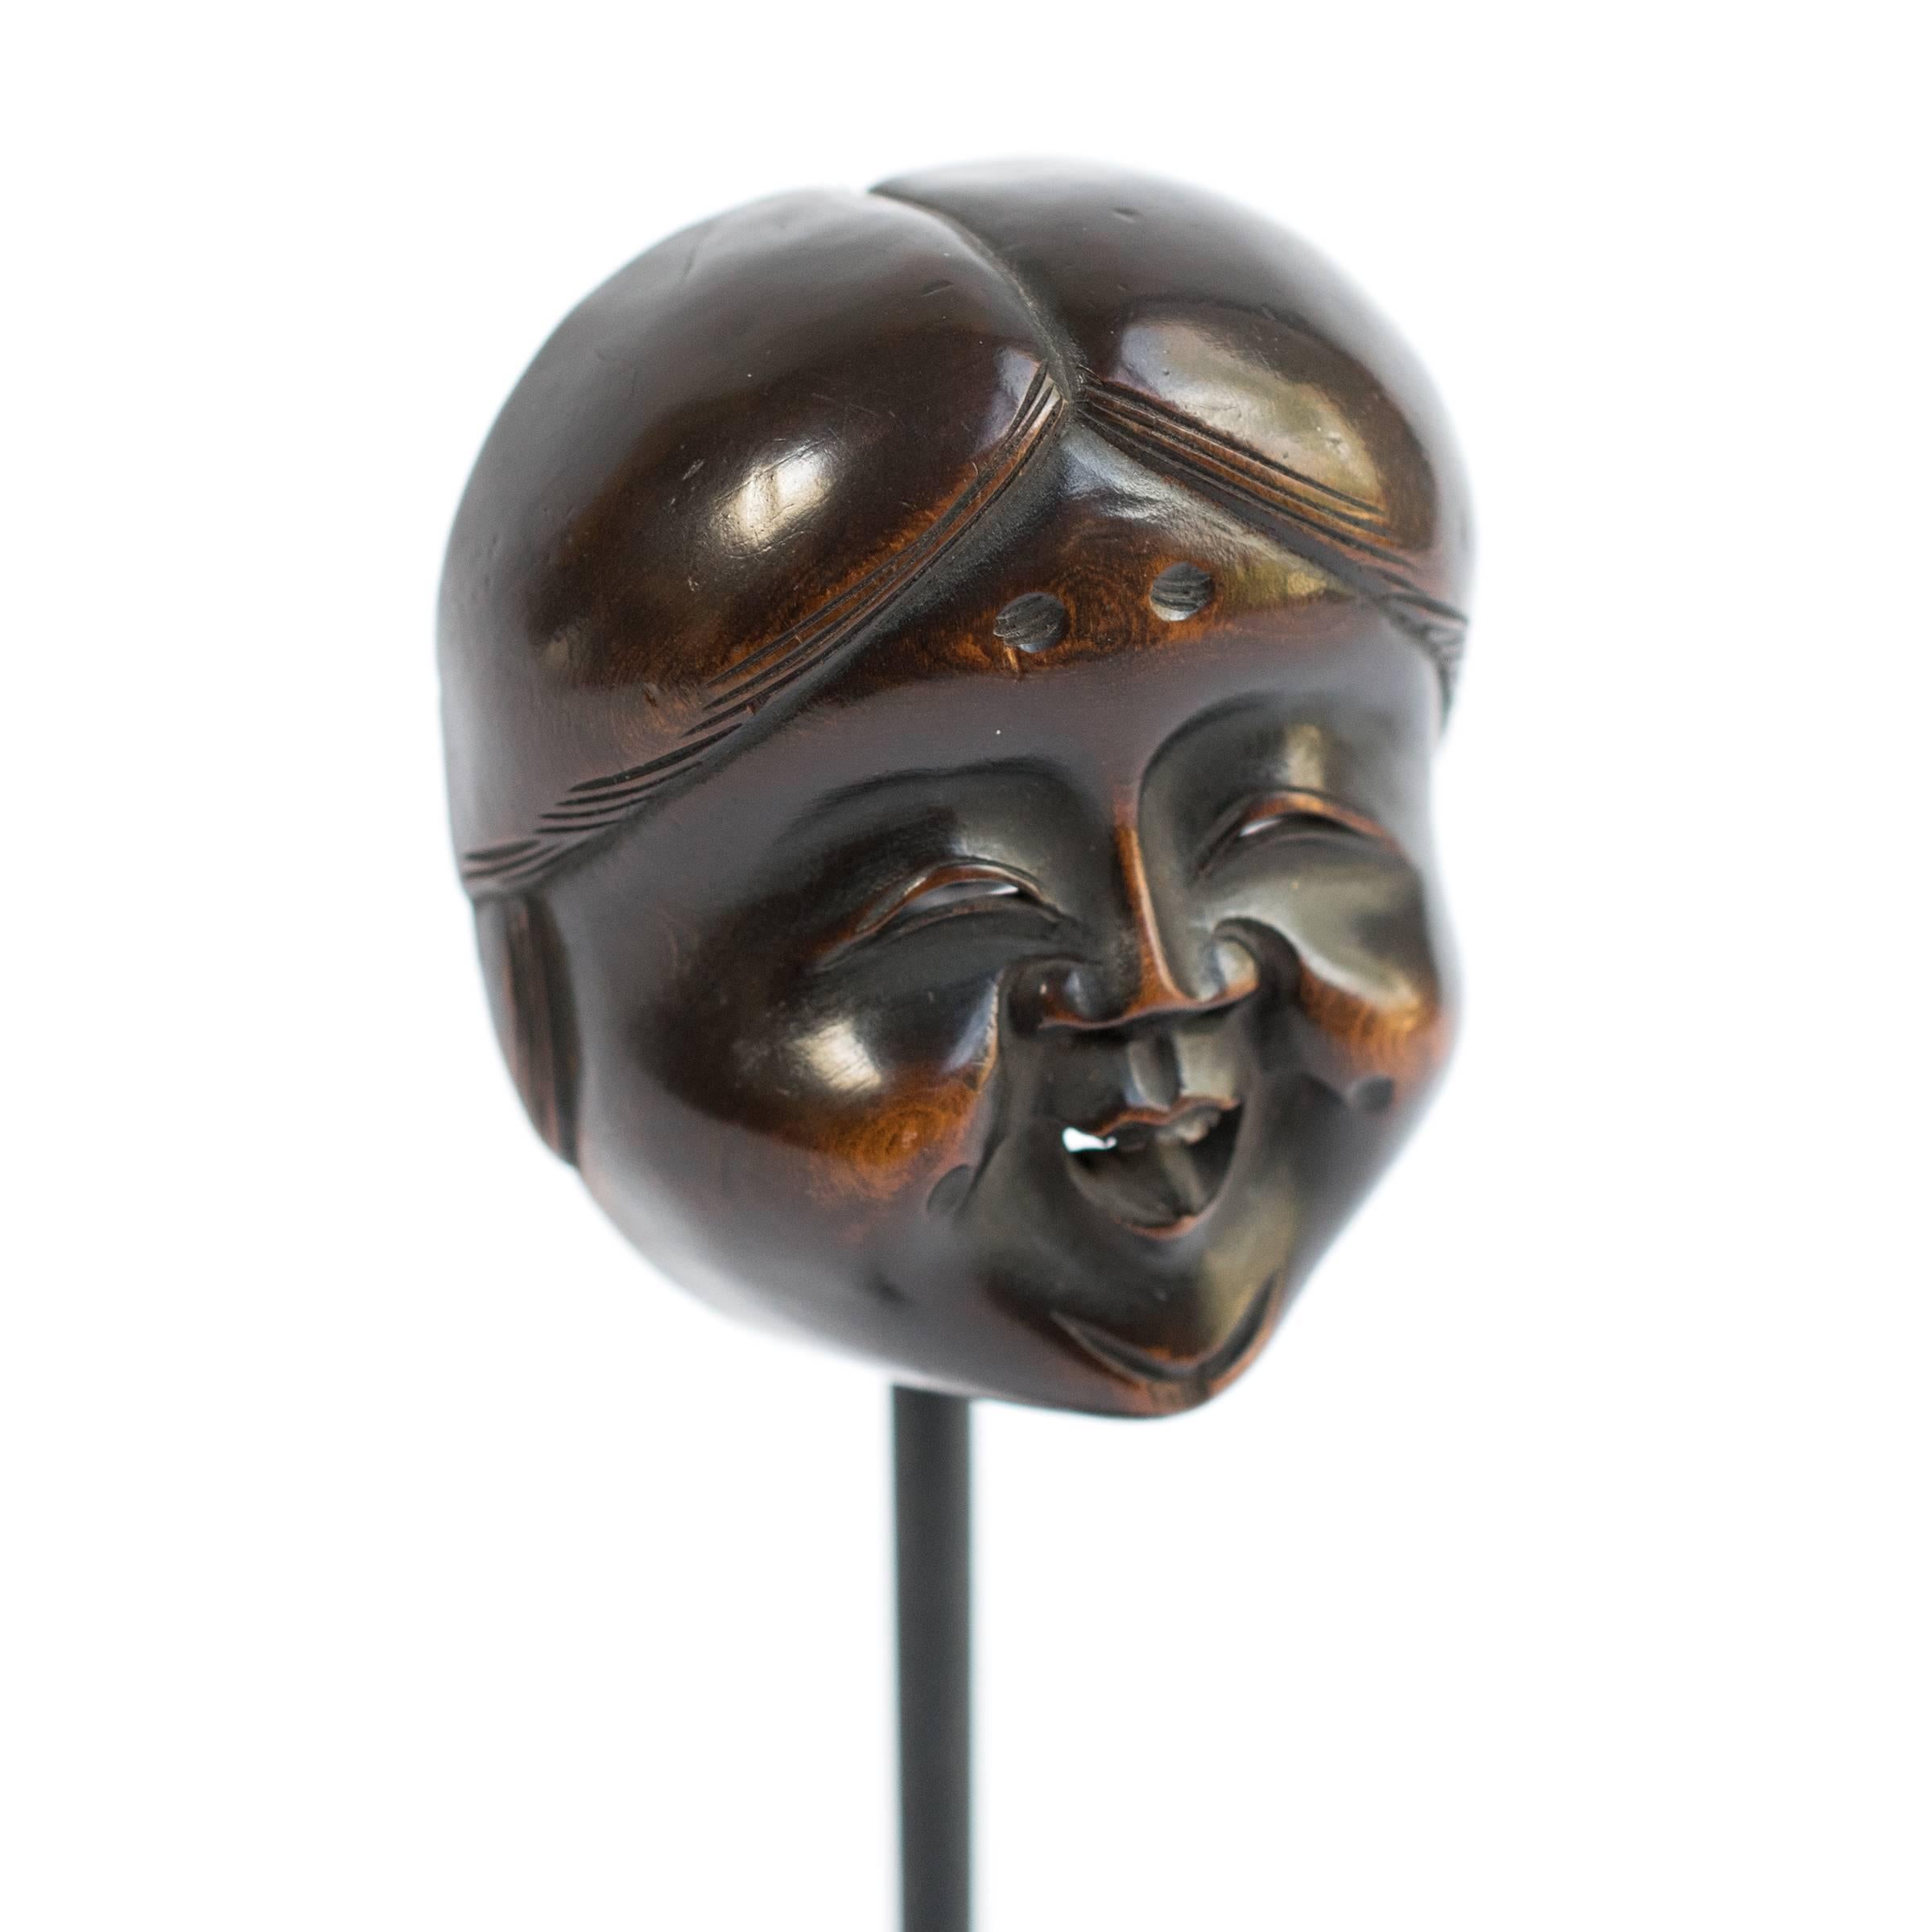 This netsuke (or button-like toggle) would once have hung from the drawstring of a small pouch or bag, which Japanese men wore at their waist. Although it had a practical purpose, this charming bead has exquisite detail and has developed a deep rich